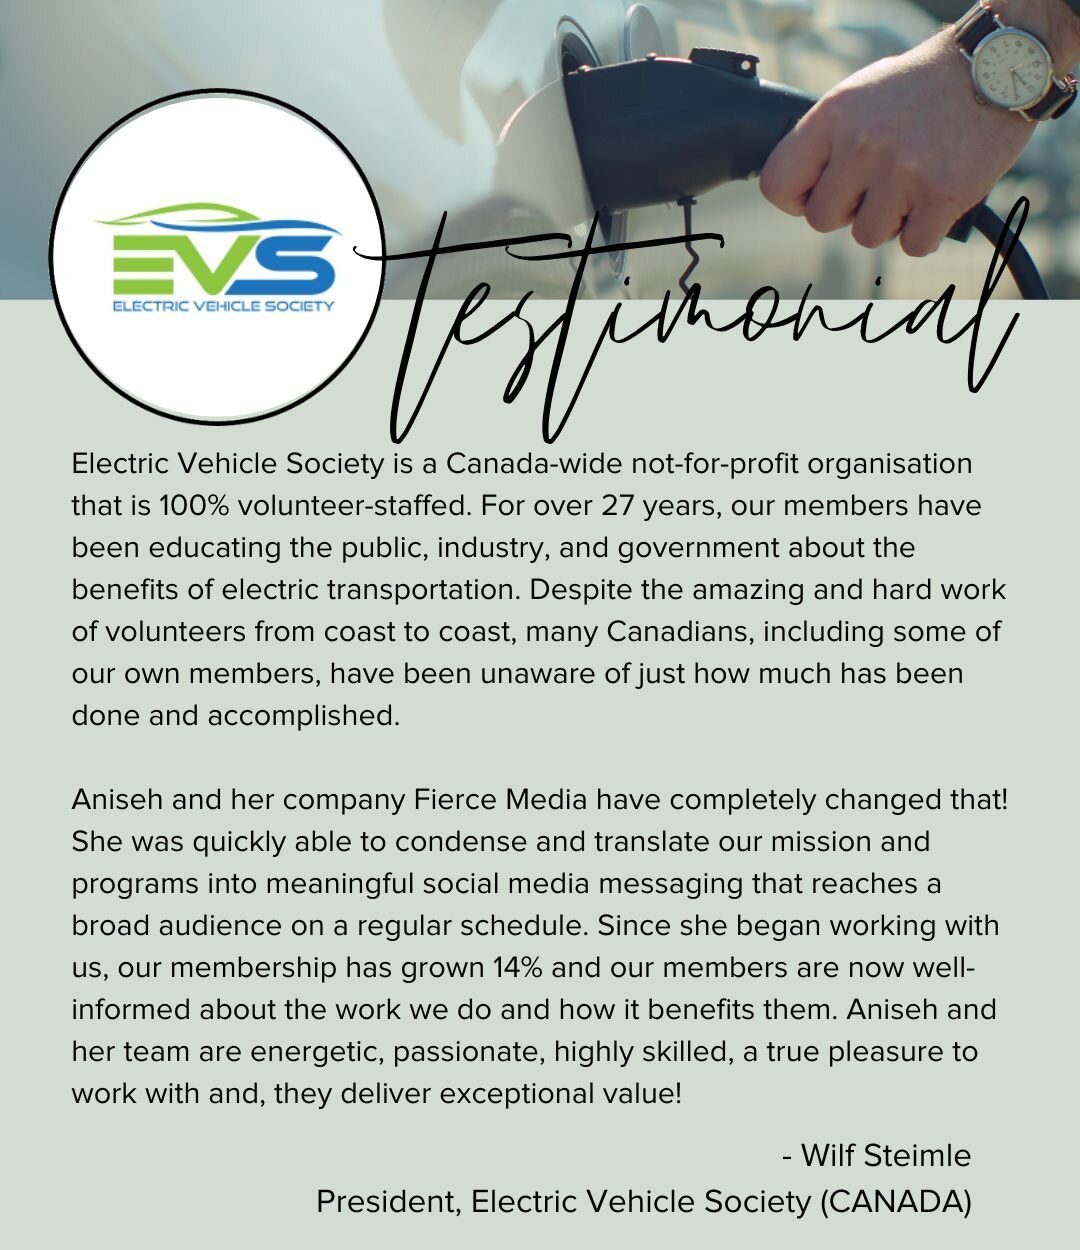 Thank you for the kind words, Wilf! At Fierce Media we are dedicated to supporting meaningful organizations like the Electric Vehicle Society and spreading awareness about the importance of sustainable transportation. 

We are honored that you chose 